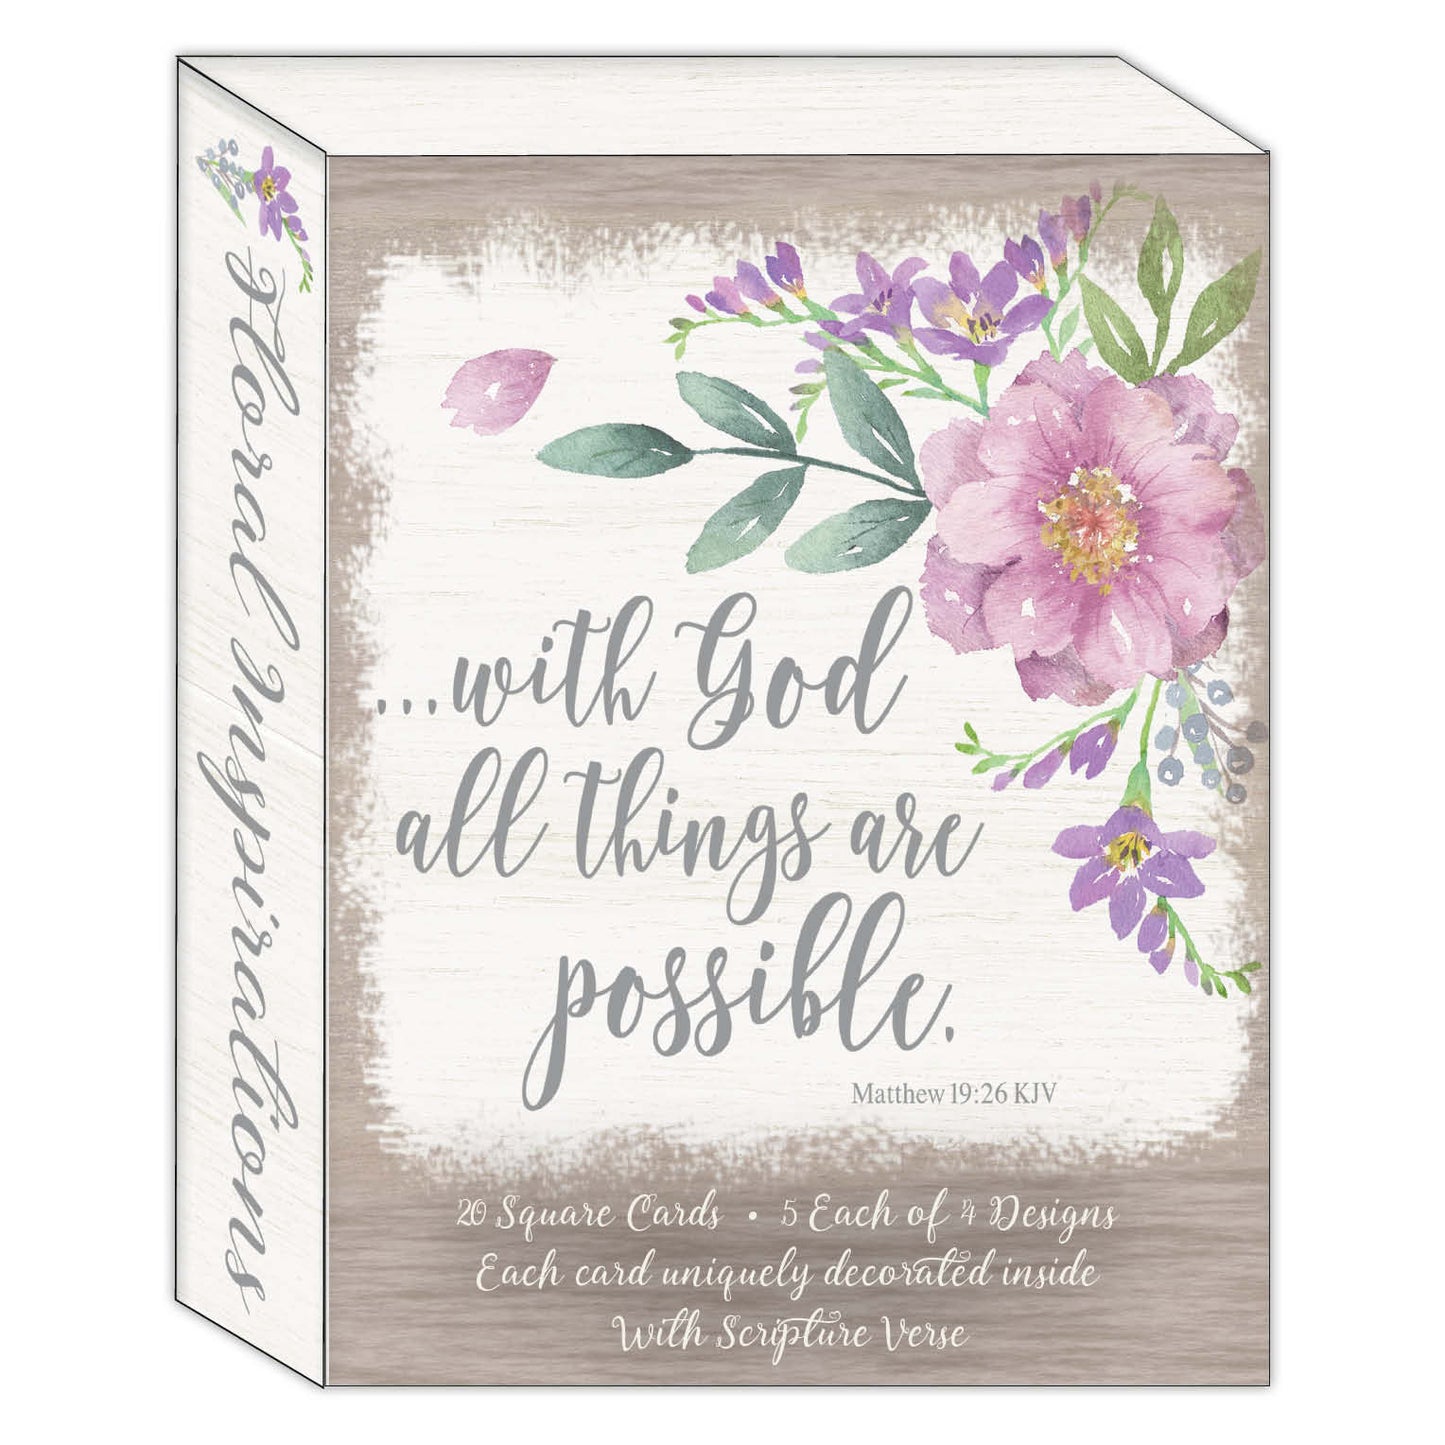 Floral Inspirations - Boxed Note Card Assortment - 20 Cards & 20 Envelopes